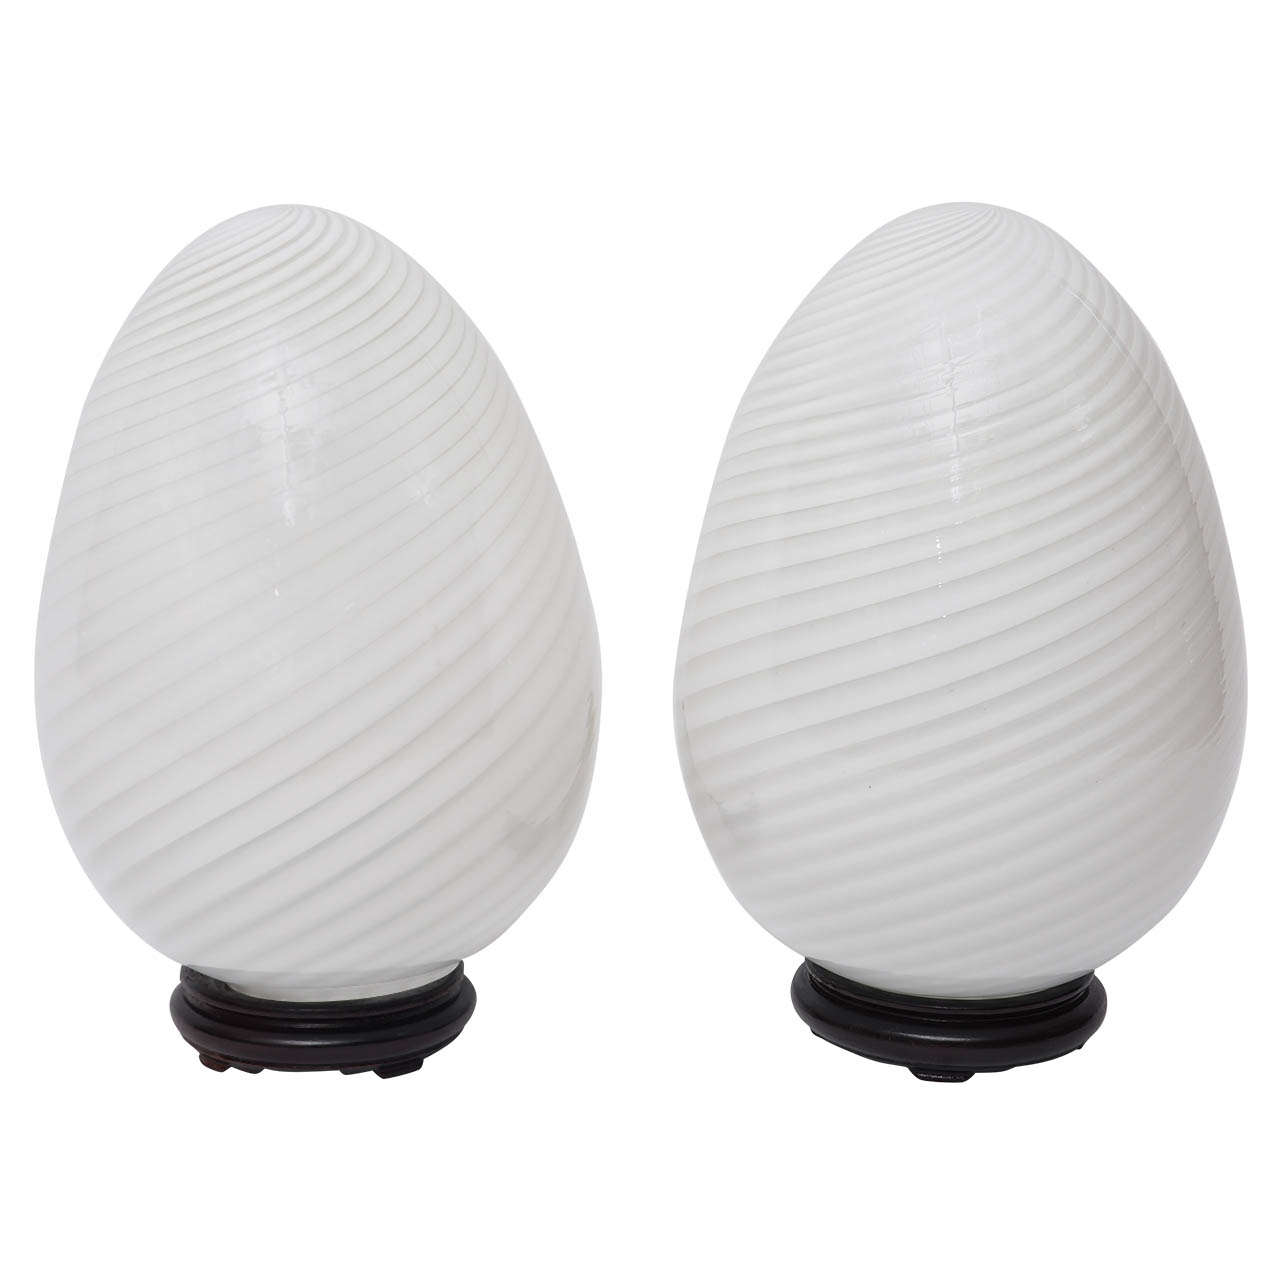 Pair of Murano Egg Table Lamps